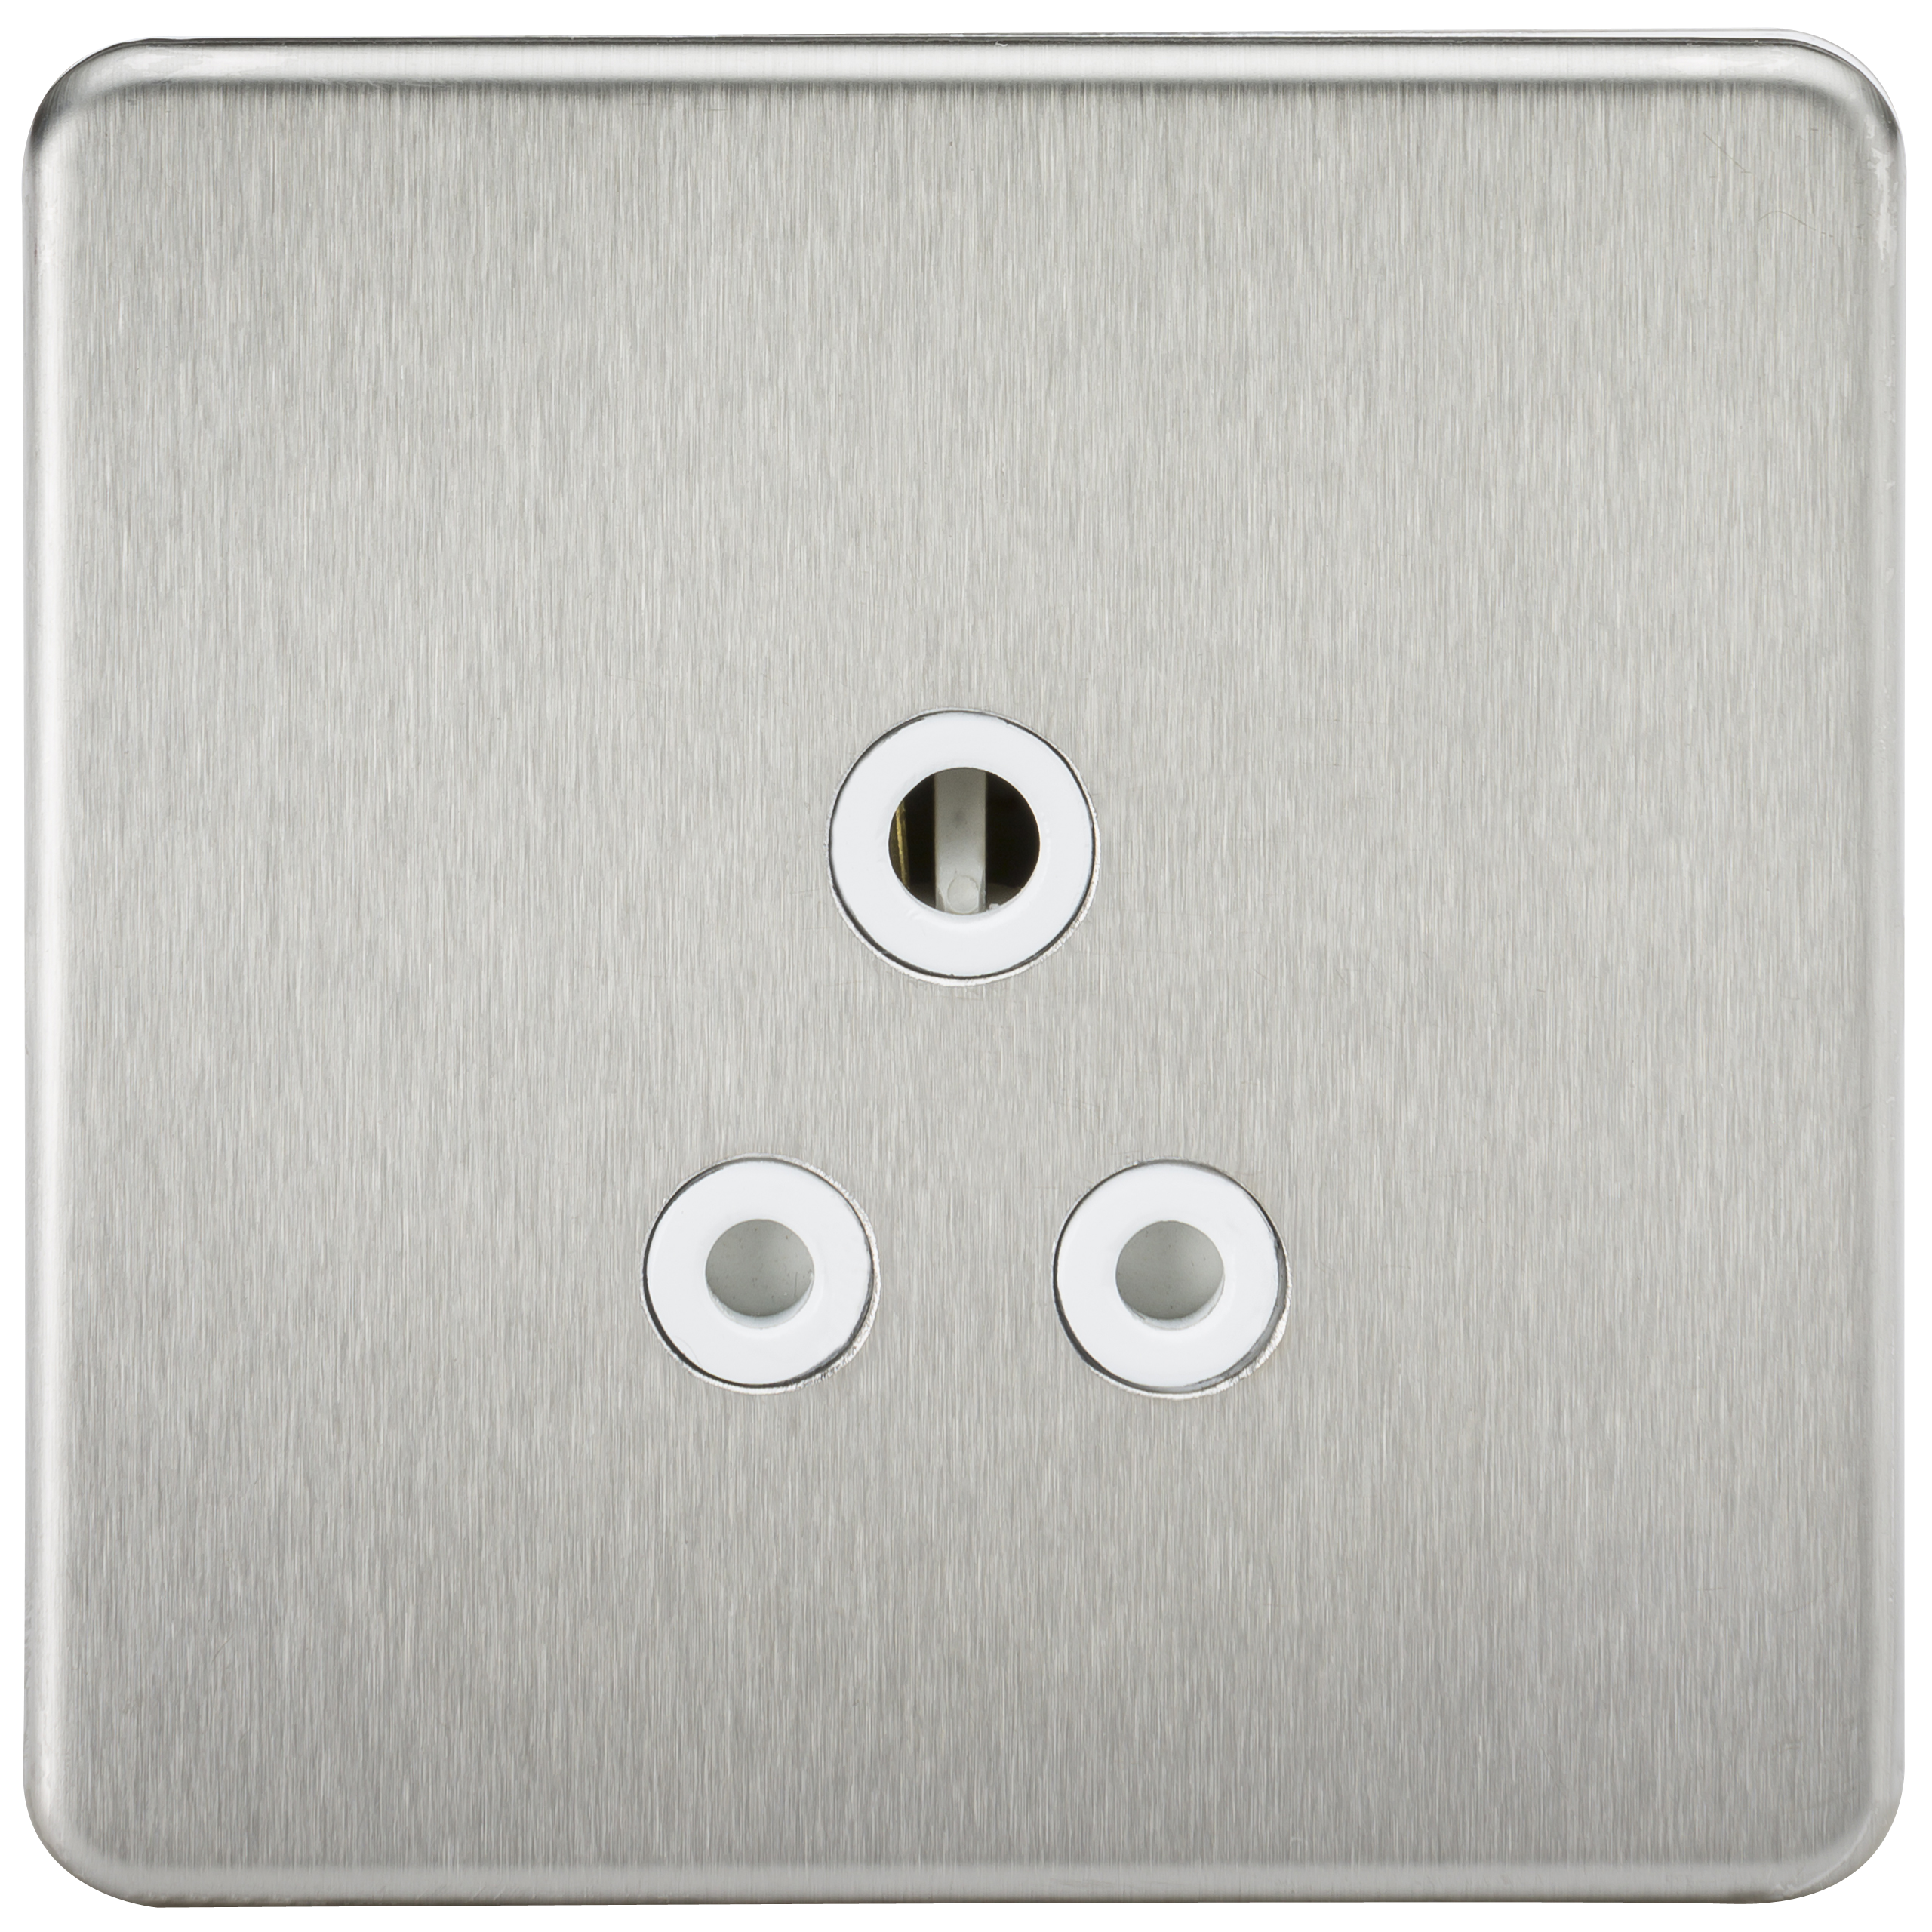 Screwless 5A Unswitched Socket - Brushed Chrome With White Insert - SF5ABCW 